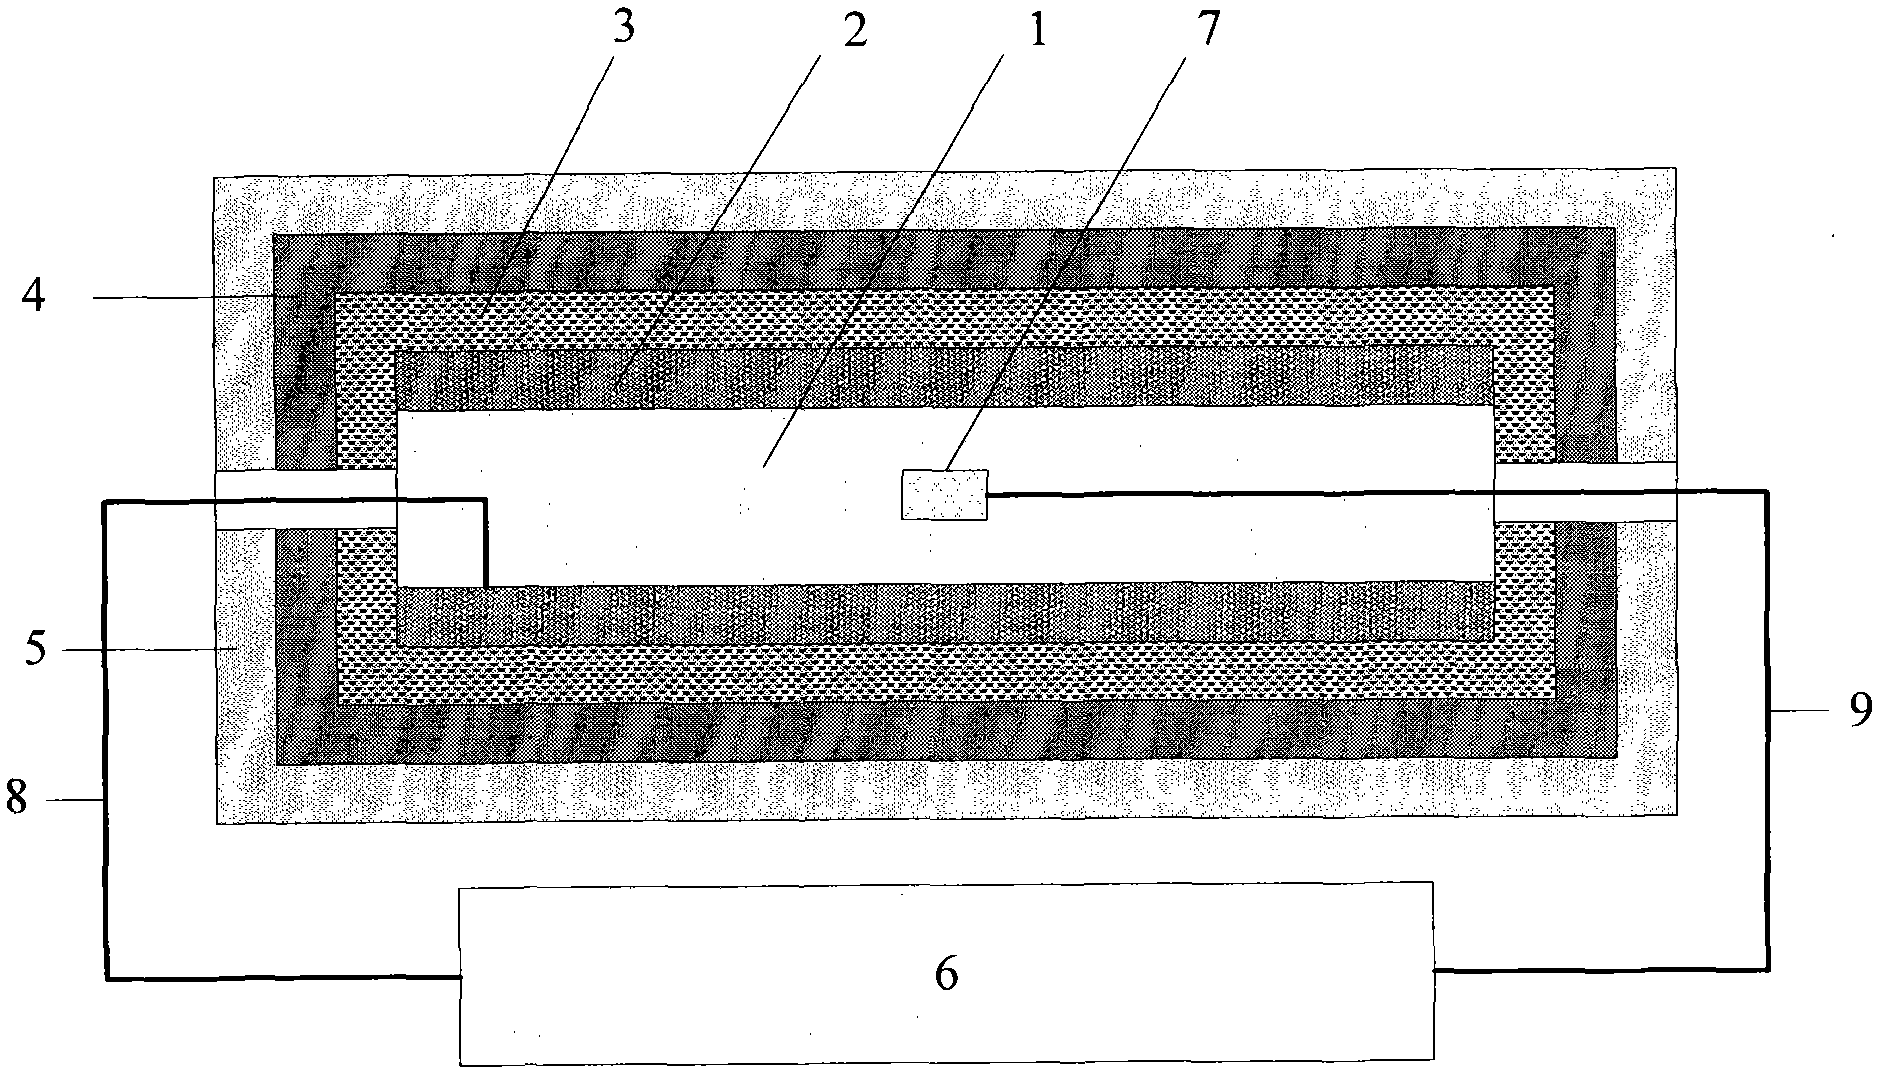 Device and method for heating and heat preserving of optical devices